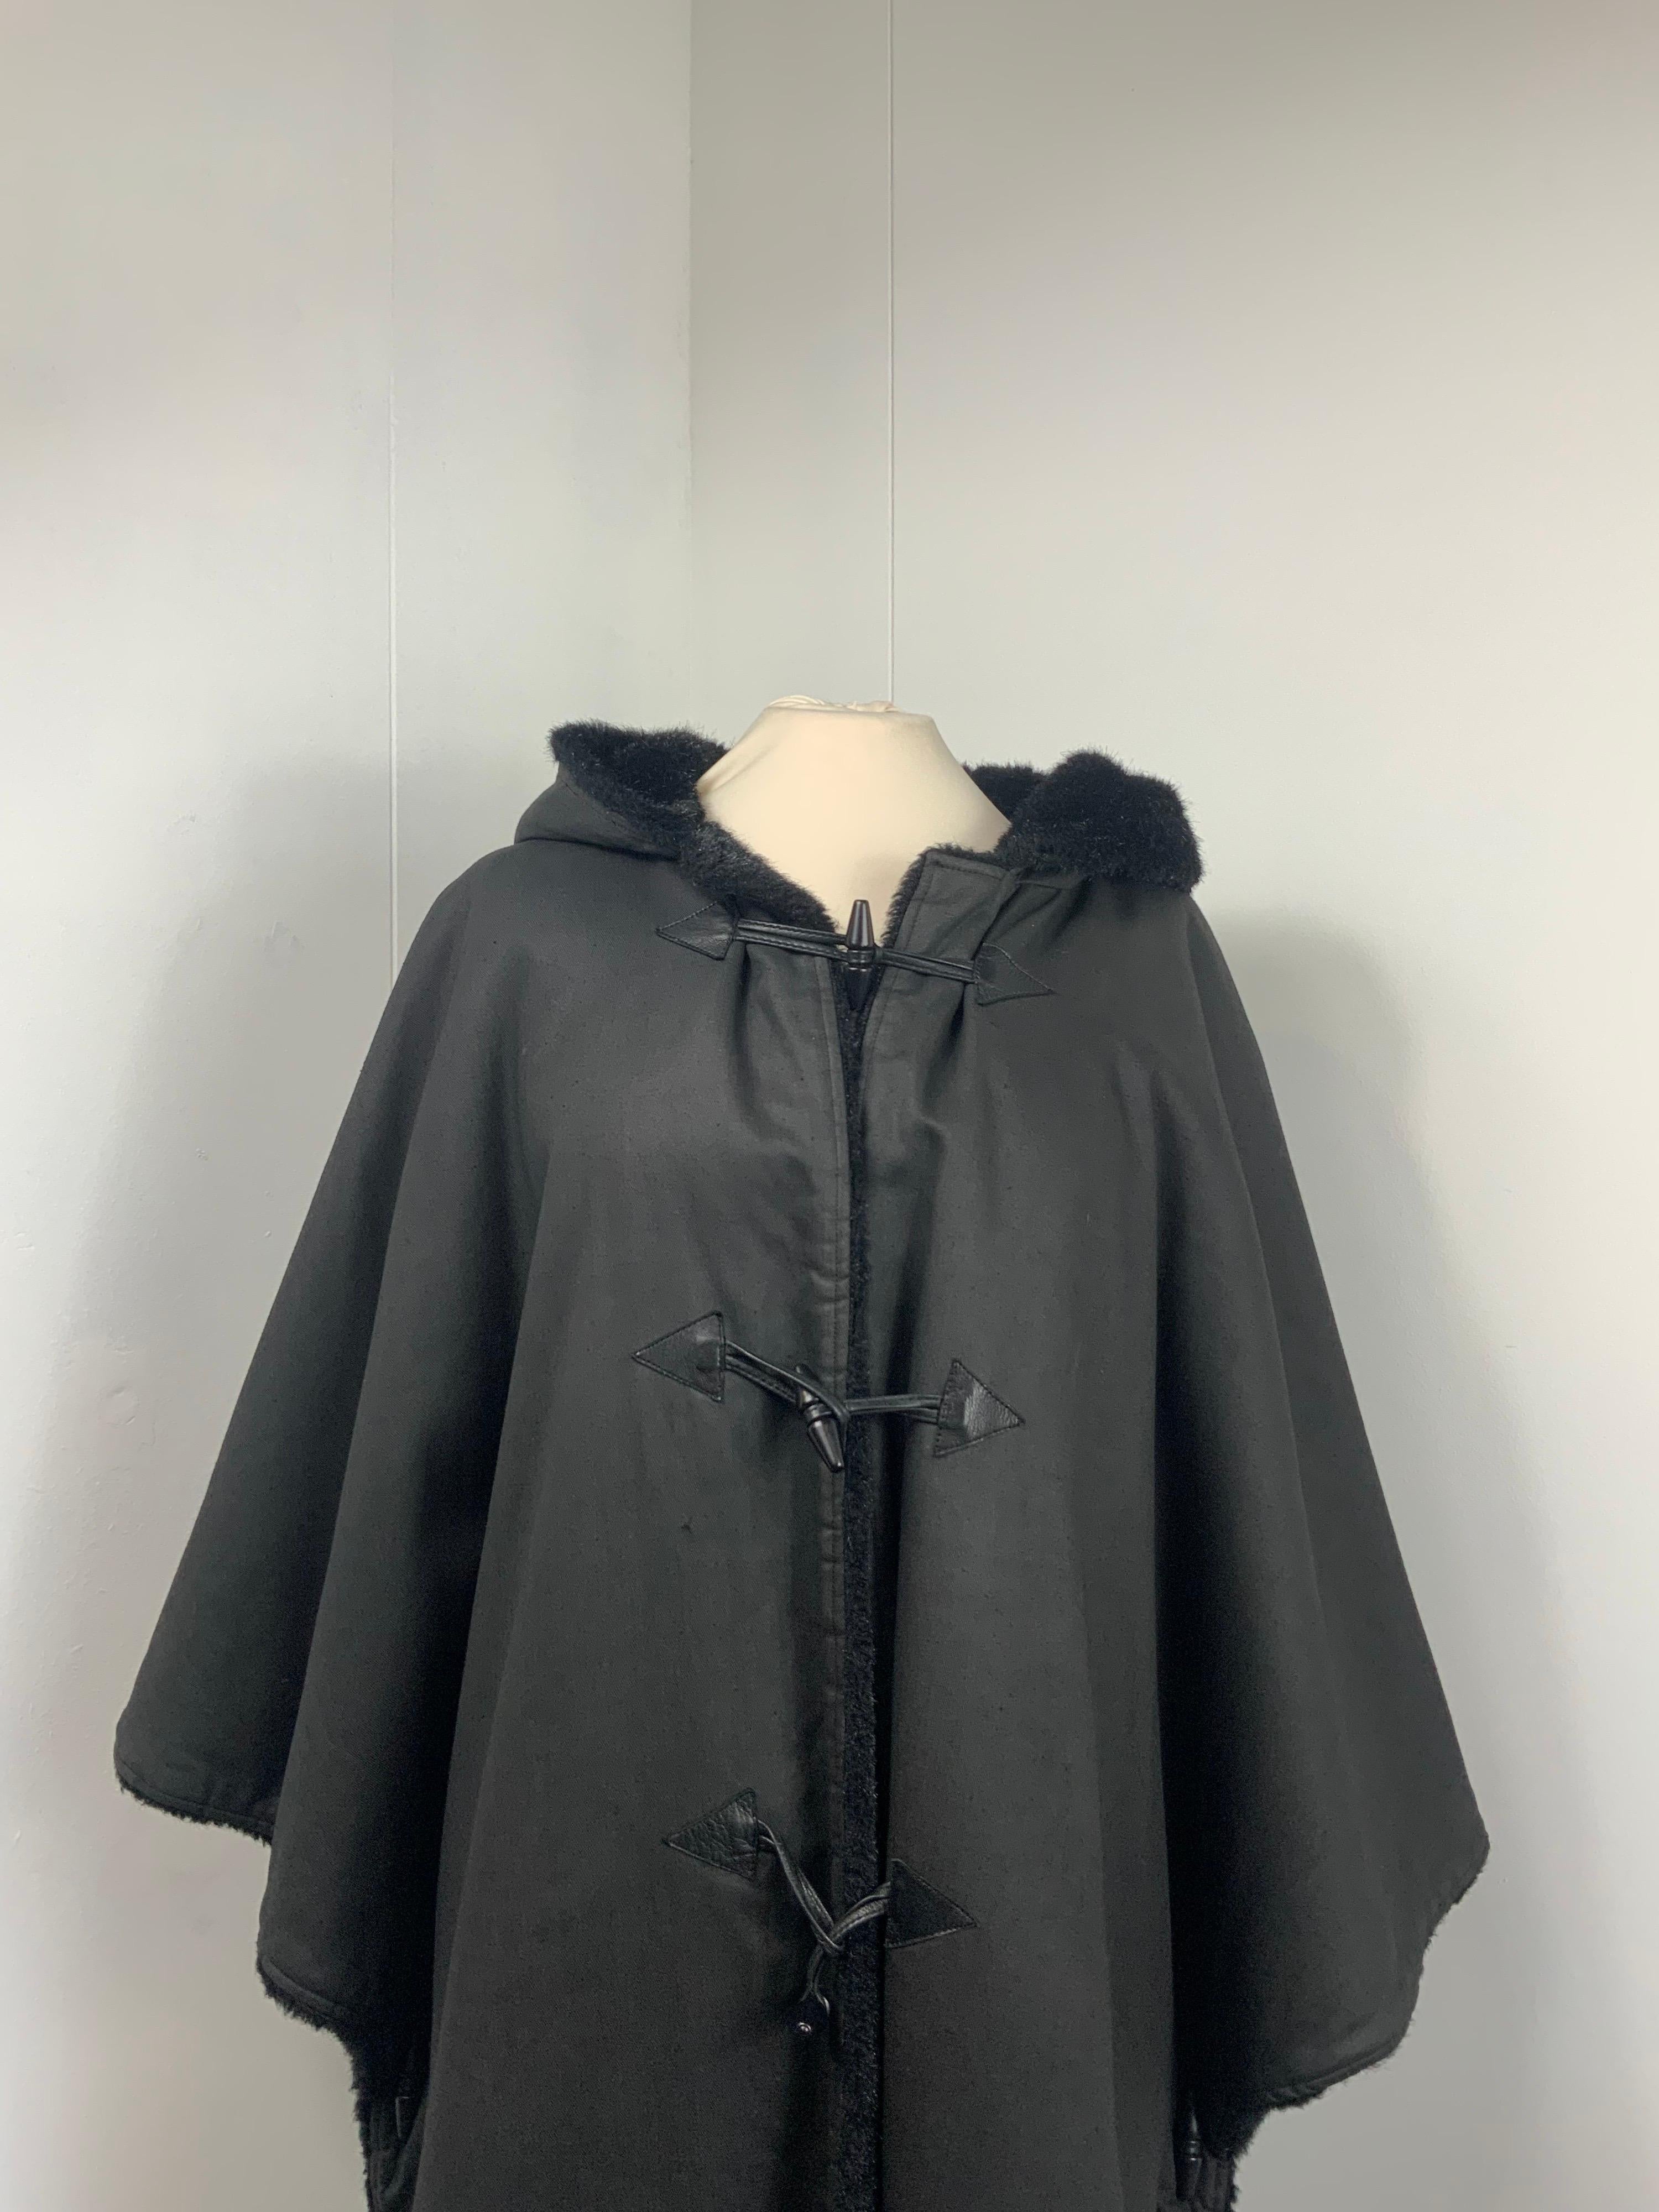 Yves Saint Laurent Cloak.
The composition label is missing.
Interior in black ecologic fur.
Leather details.
Size 38 FR. It fits a 42 Italian.
Shoulders 43 cm
Bust 50 cm circa 
Length 105 cm 
Conditions: Good - Previously owned and gently worn, with